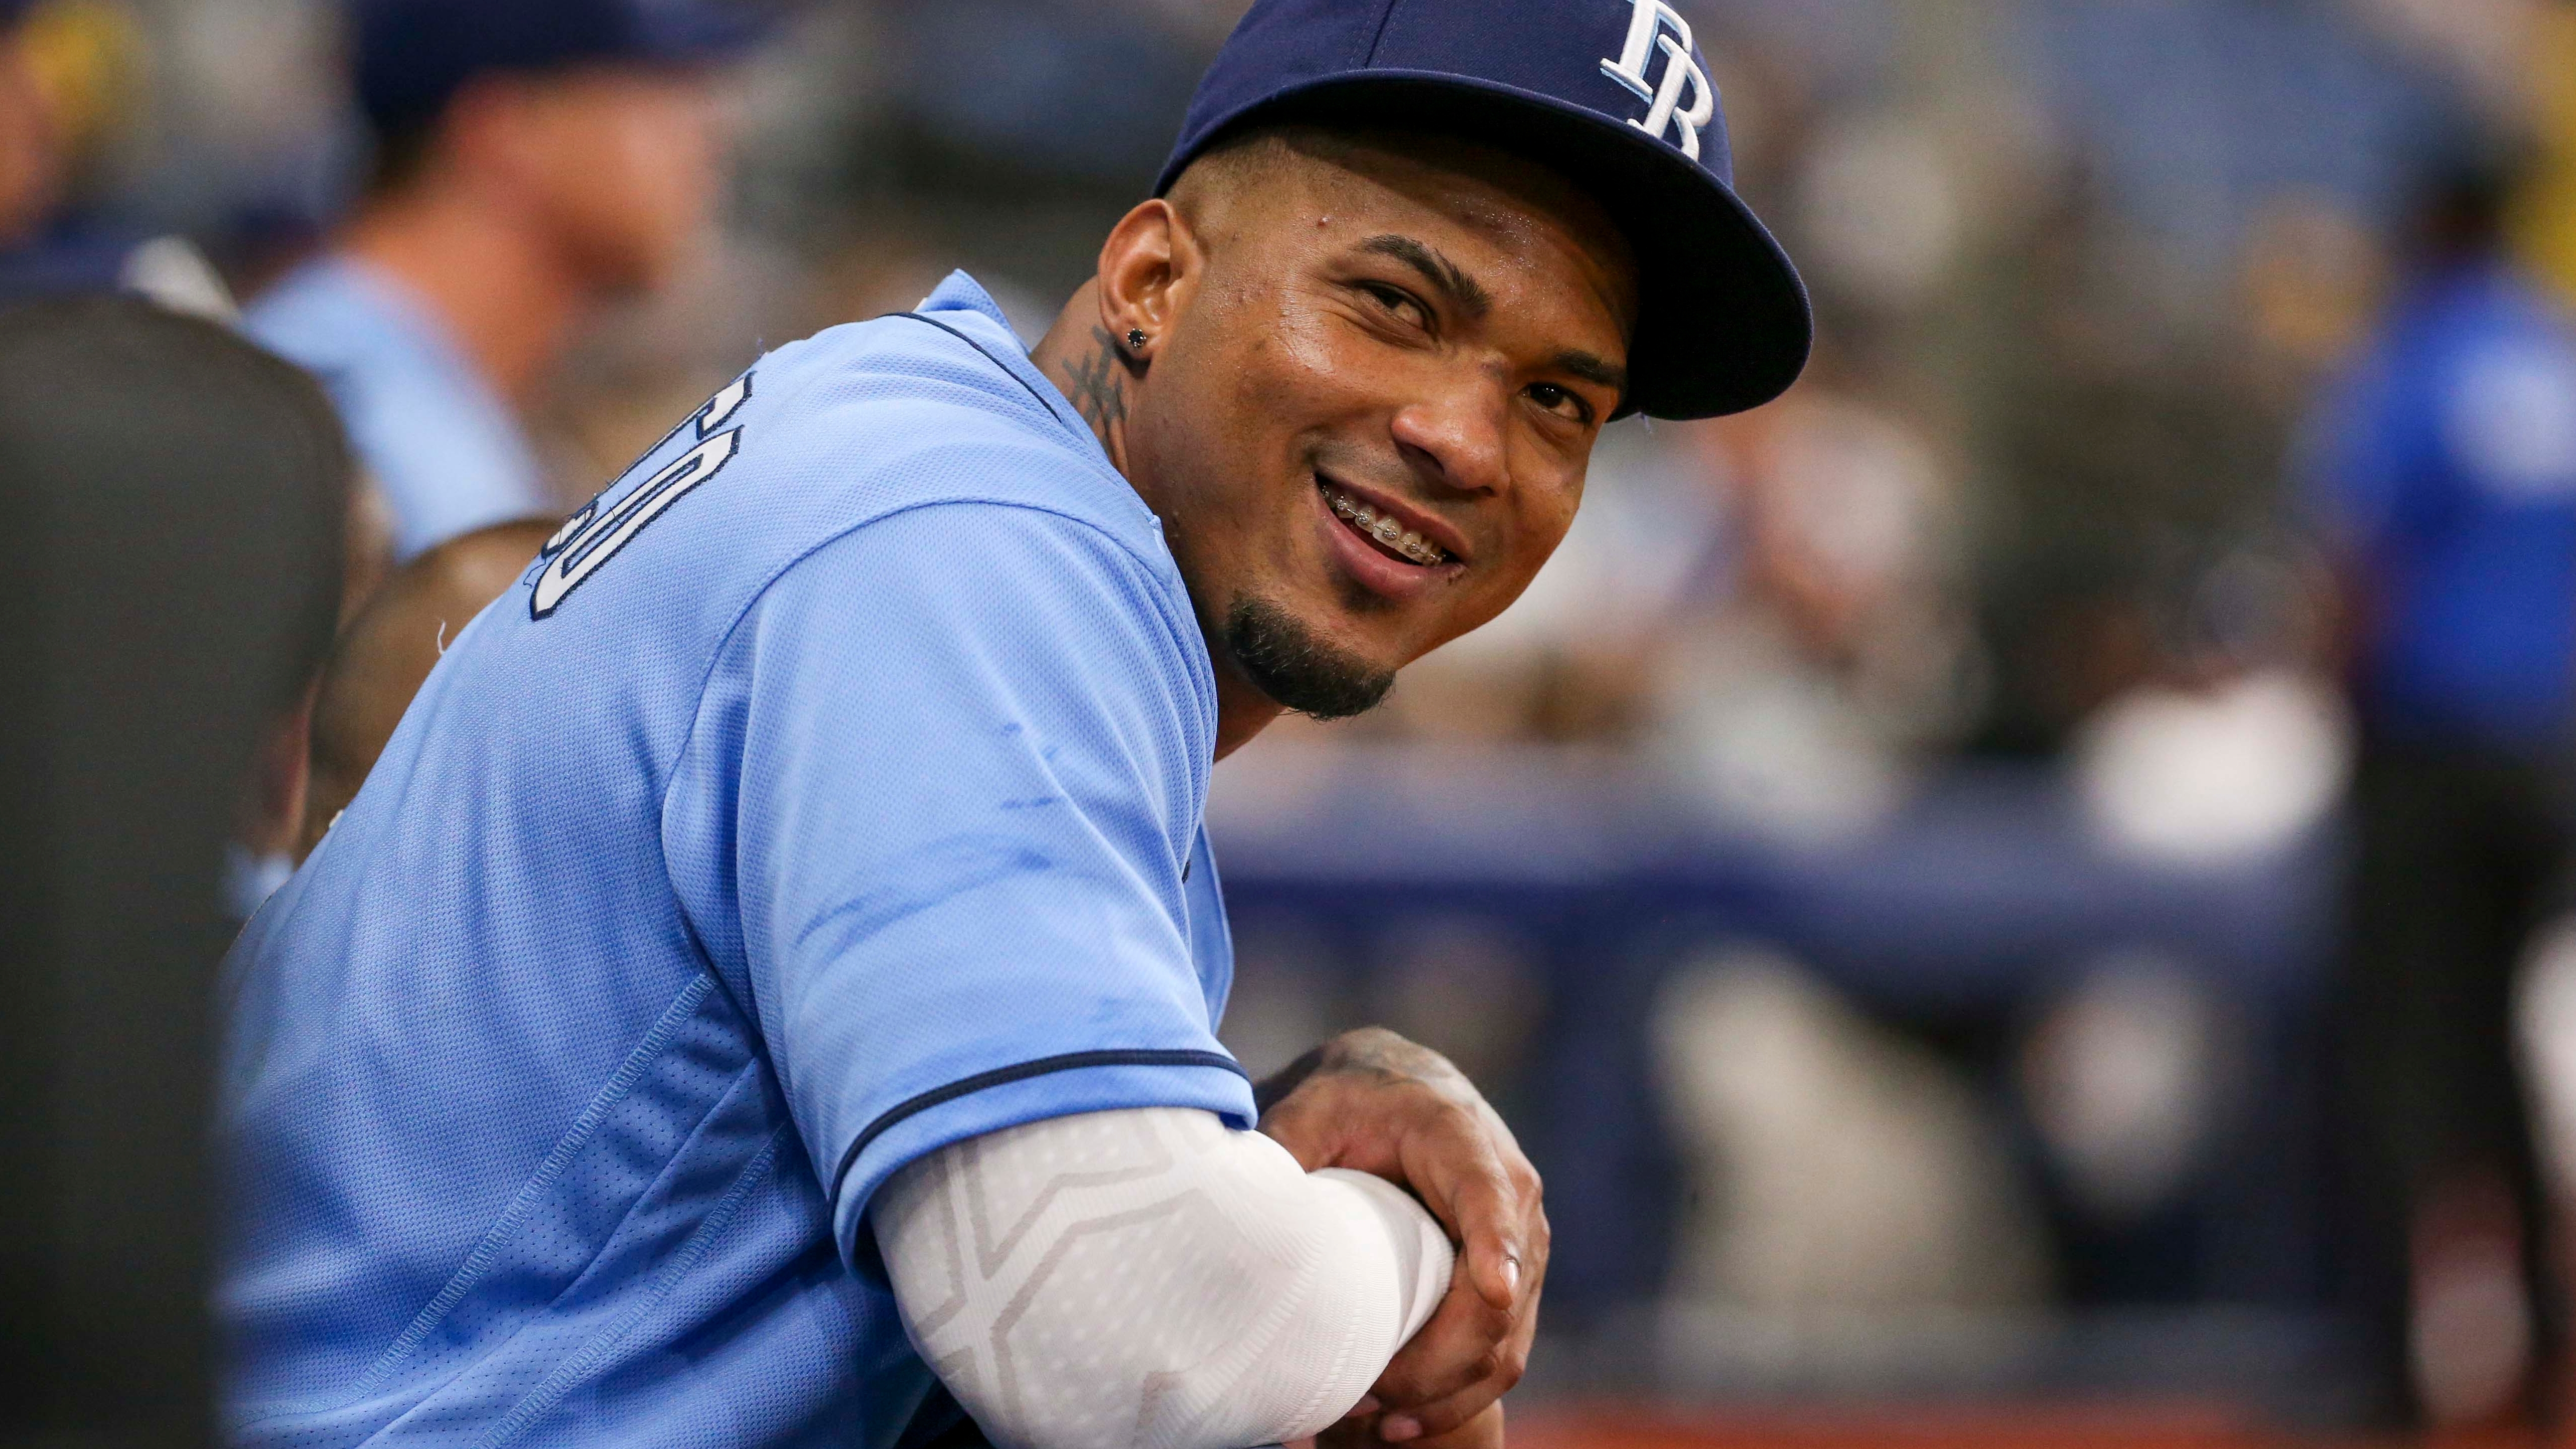 Wander Franco DENIES 'running around with a minor': Viral video surfaces  showing Rays star rejecting claims that he's dating a young girl after  Tampa Bay benches 22-year-old shortstop in wake of allegations